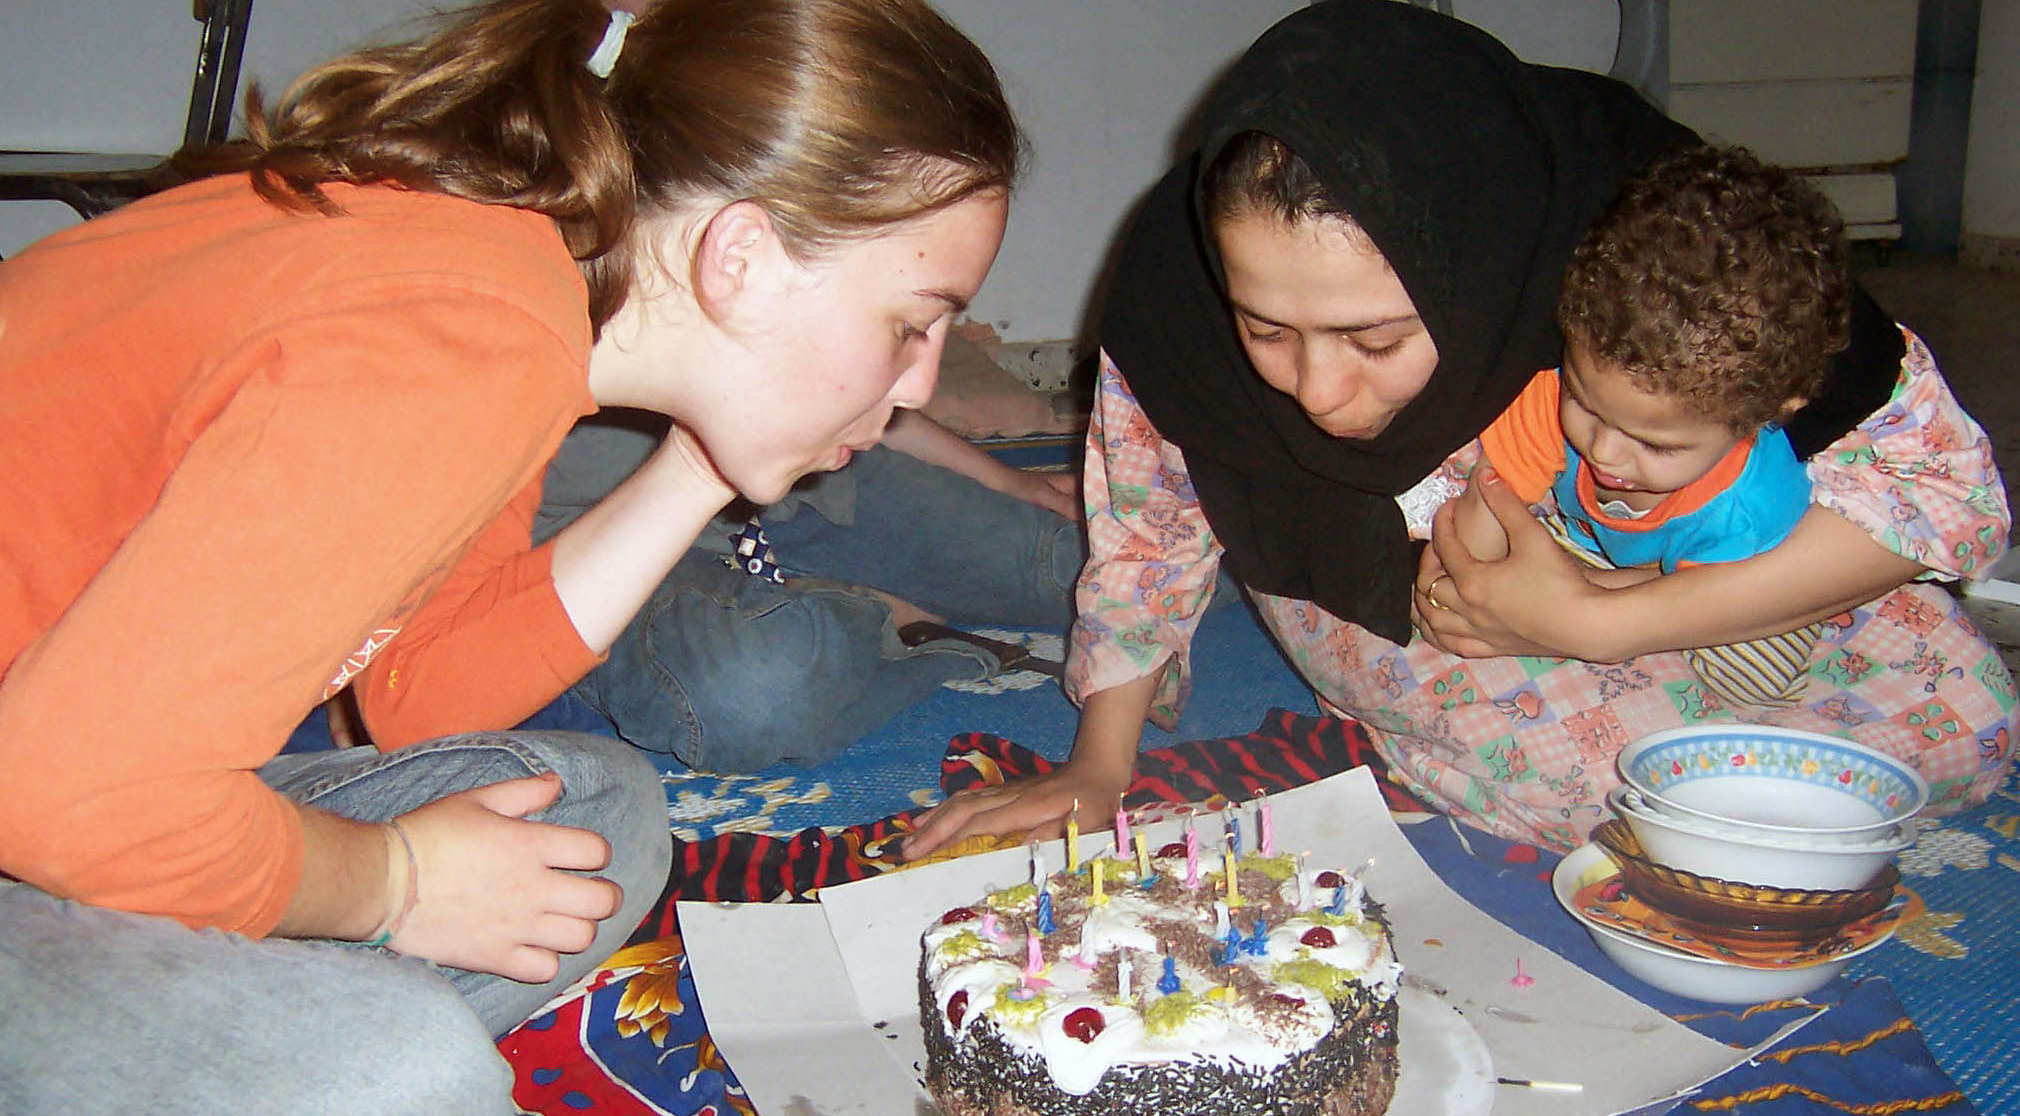 Two women blow out birthday candles, as one woman holds an infant